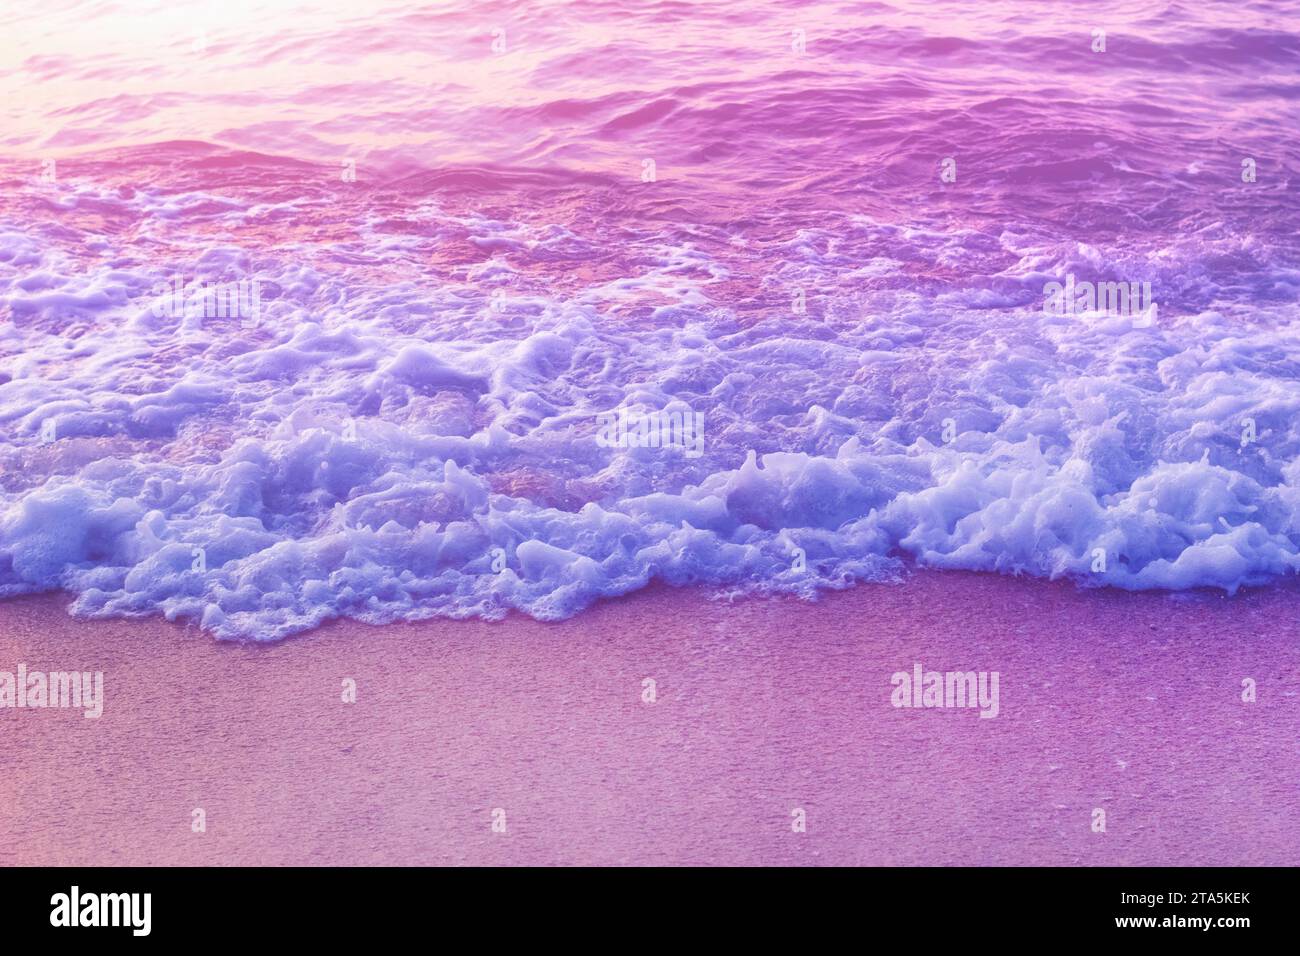 Tender Dreamy Pink Sea Waves On Shore. Filtered Color. Stock Photo